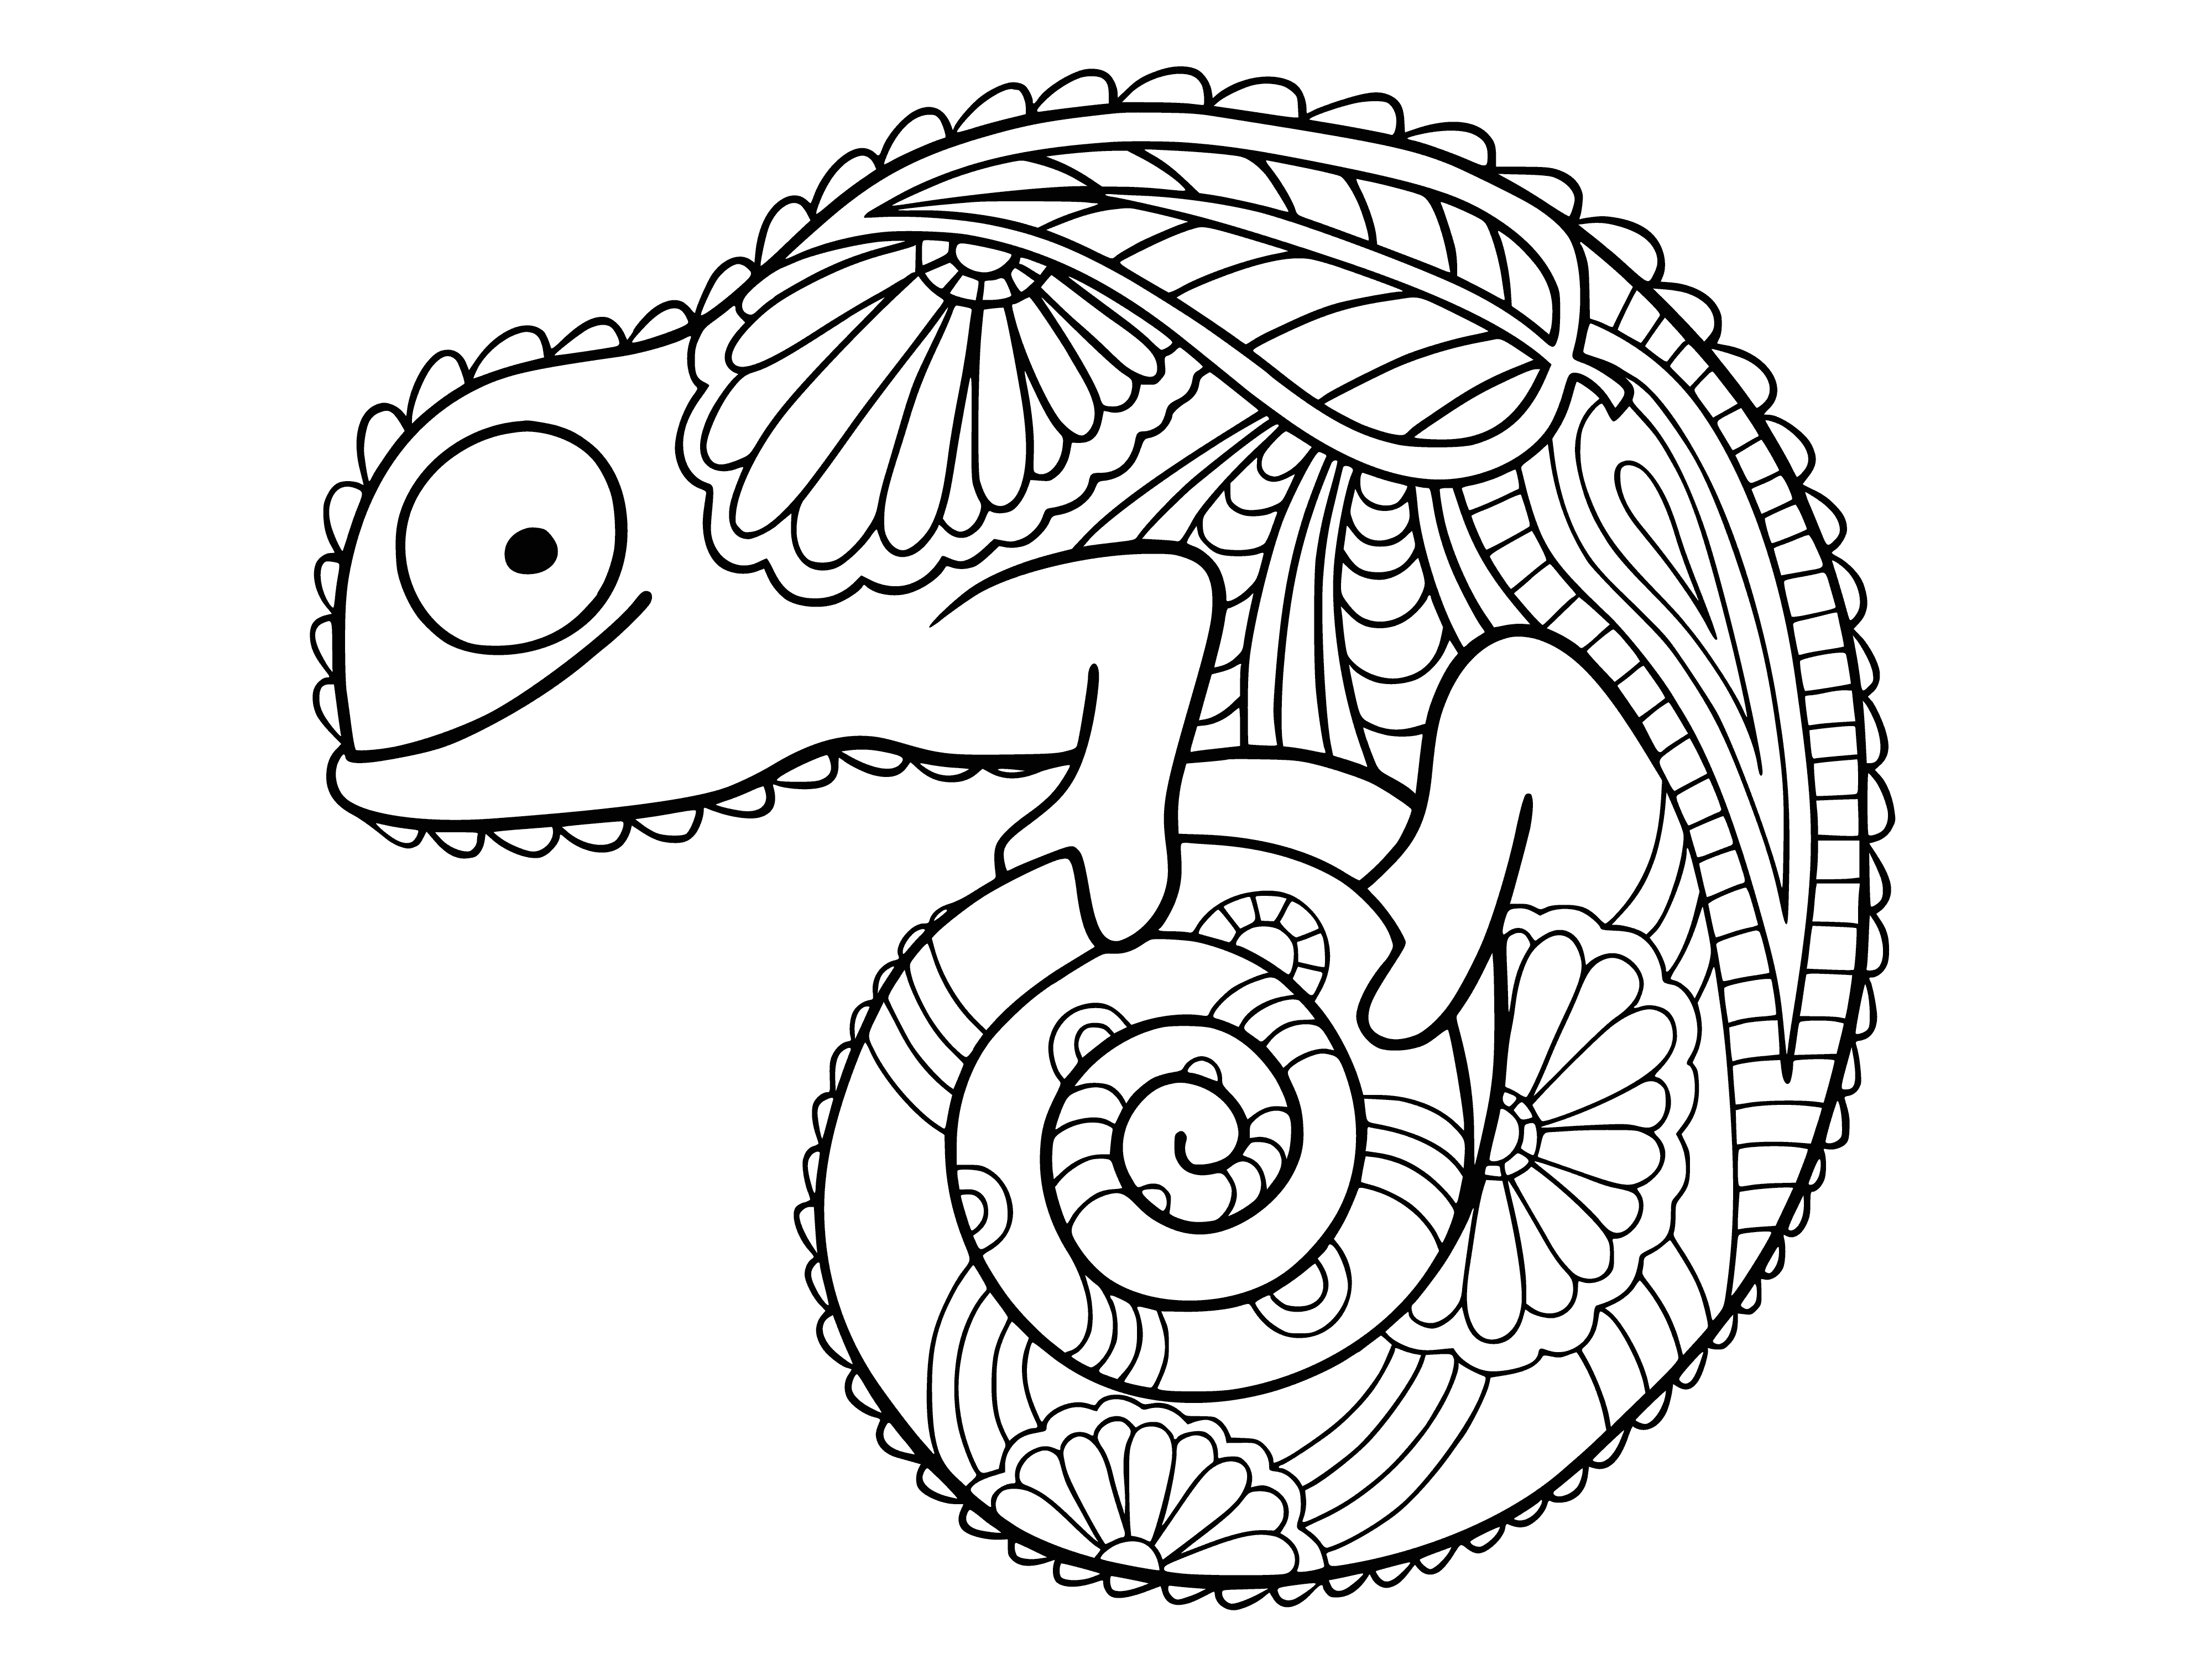 coloring page: Chameleon perched, tongue flicking to catch a fly. Dull green skin, spots of brown & yellow. Large, bulging eyes, crest on its head.